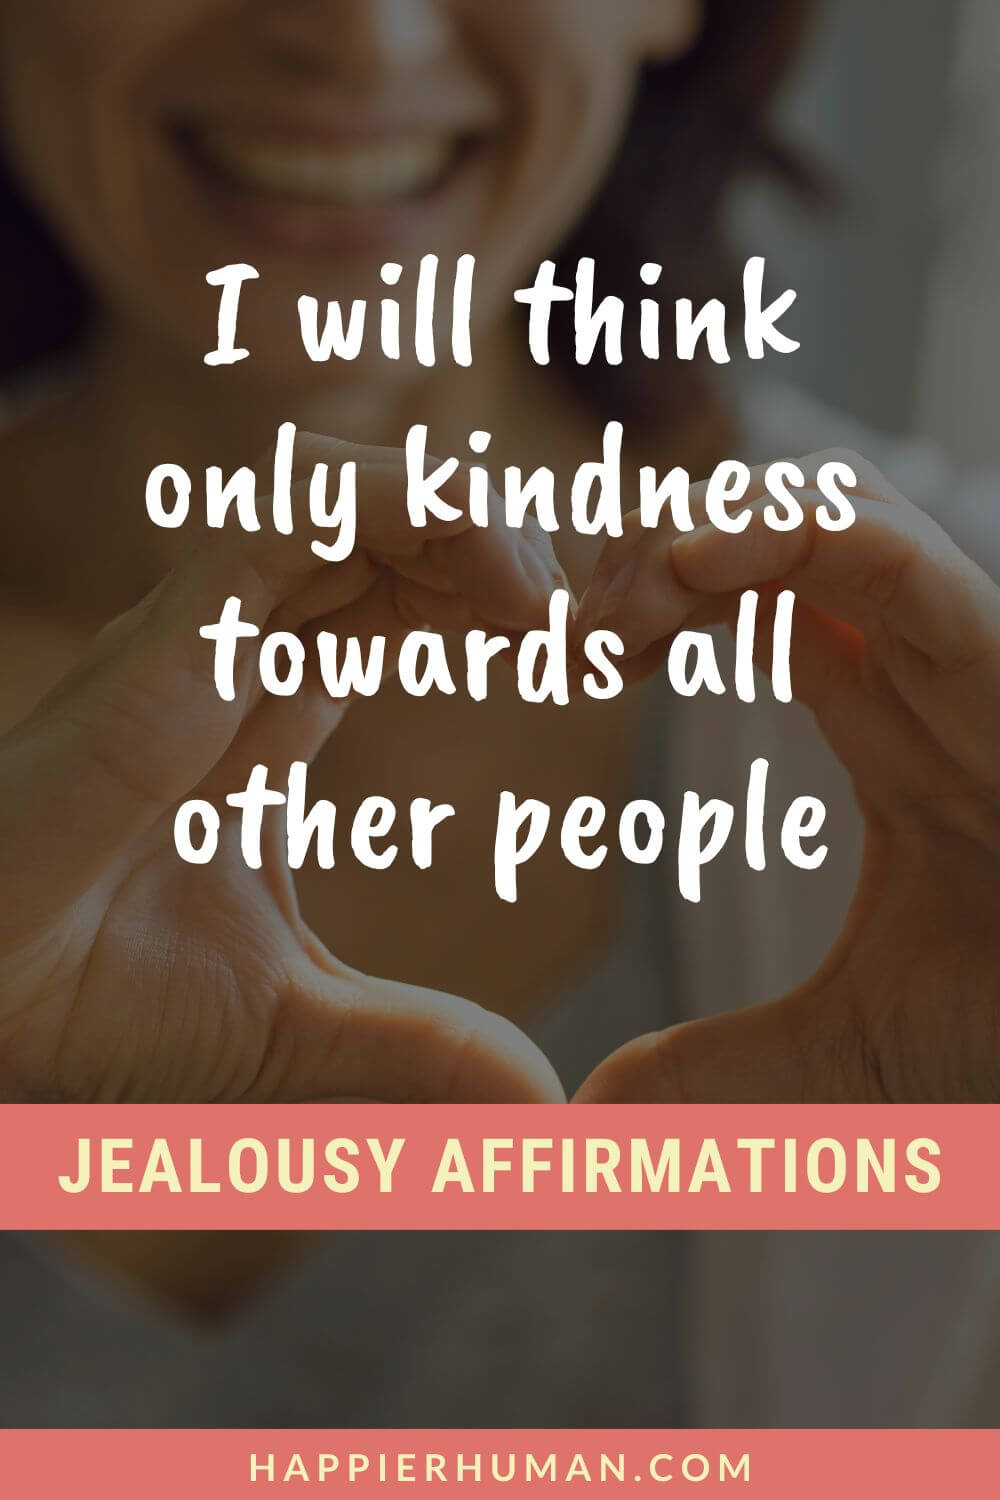 Affirmations for Jealousy - I will think only kindness towards all other people | affirmations for retroactive jealousy | affirmations to get rid of jealousy | what are some affirmations for self love